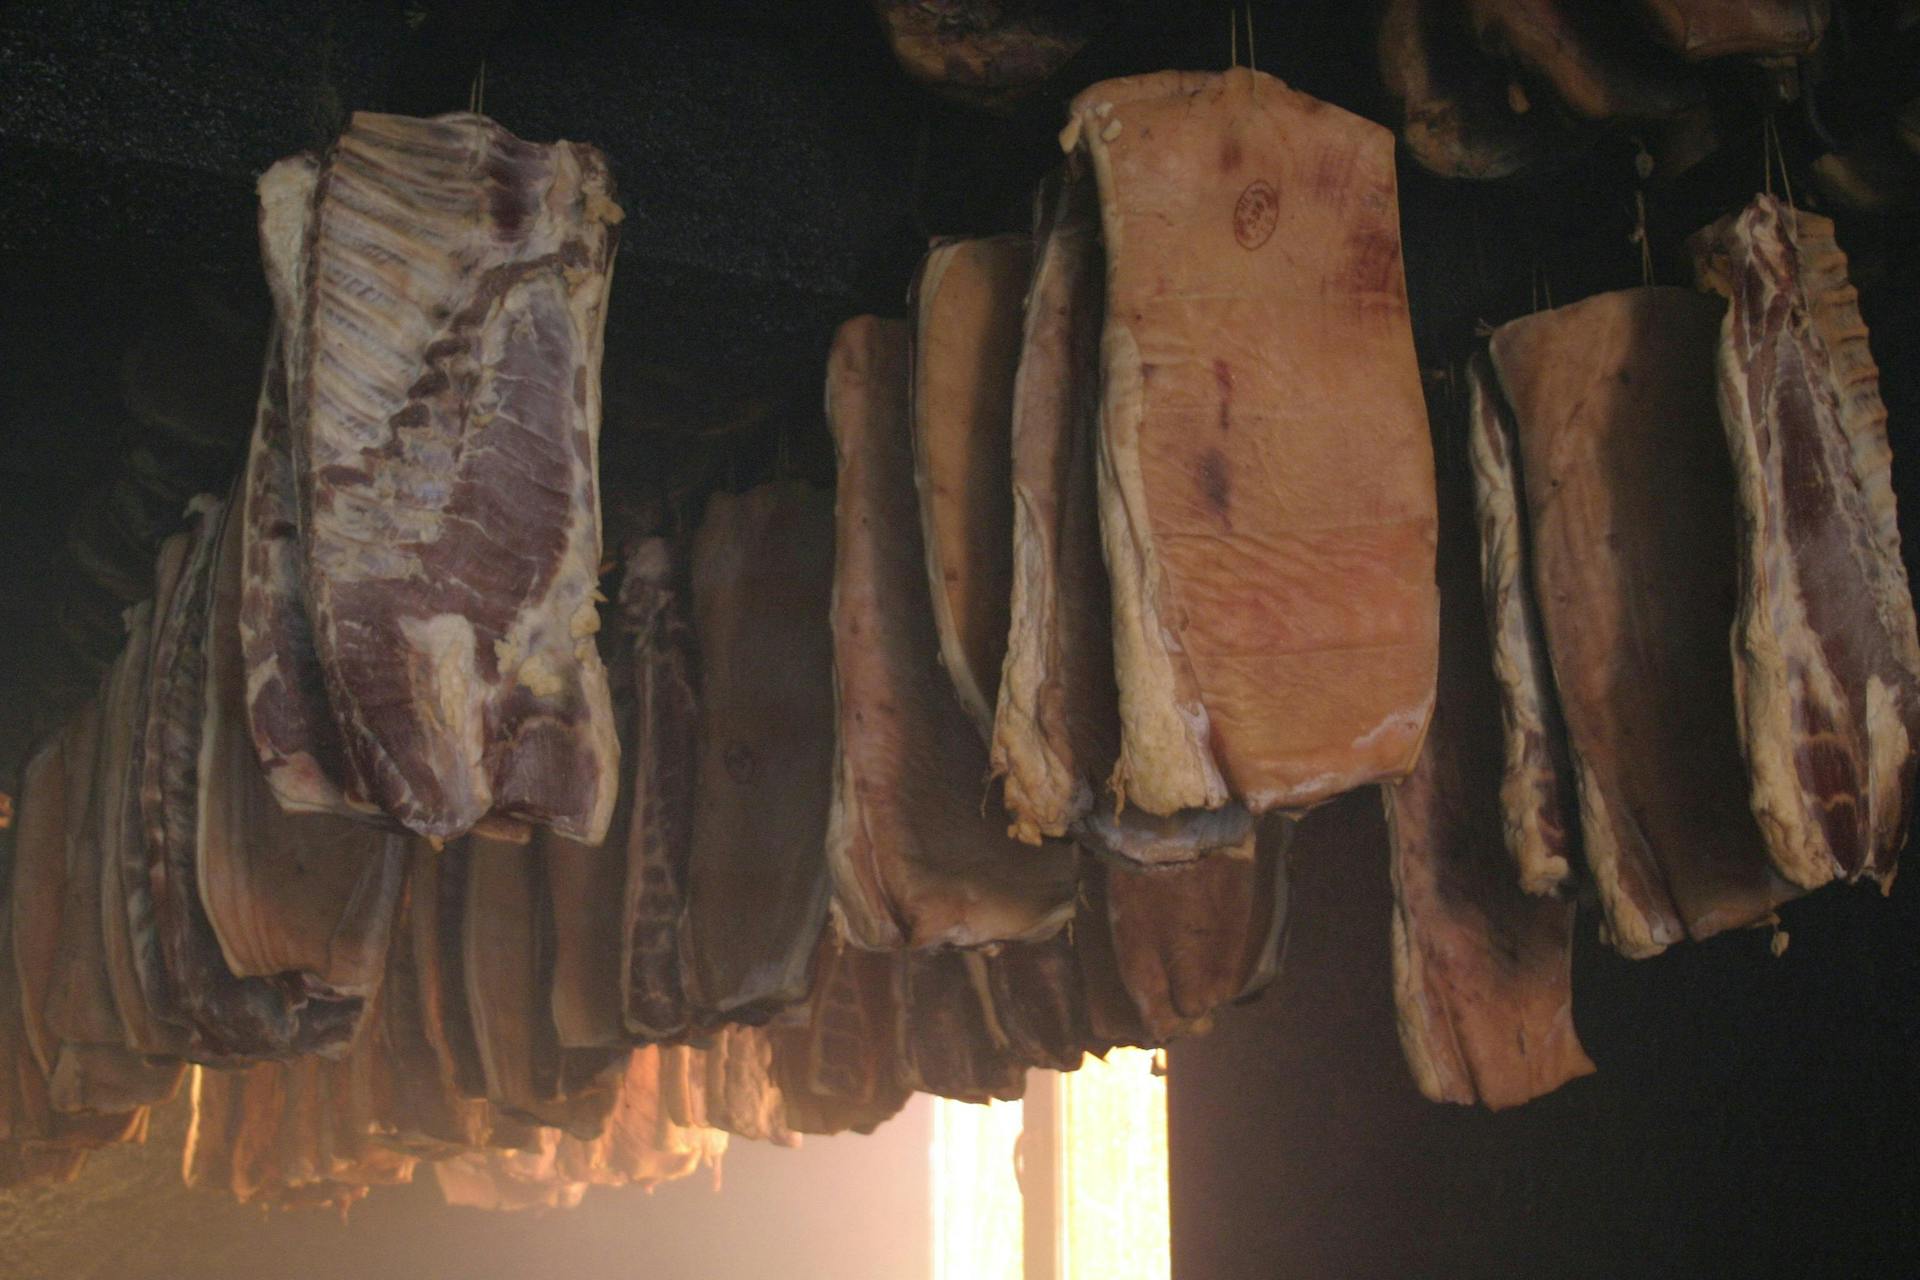 Uncut prsut ham hanging from the ceiling. 